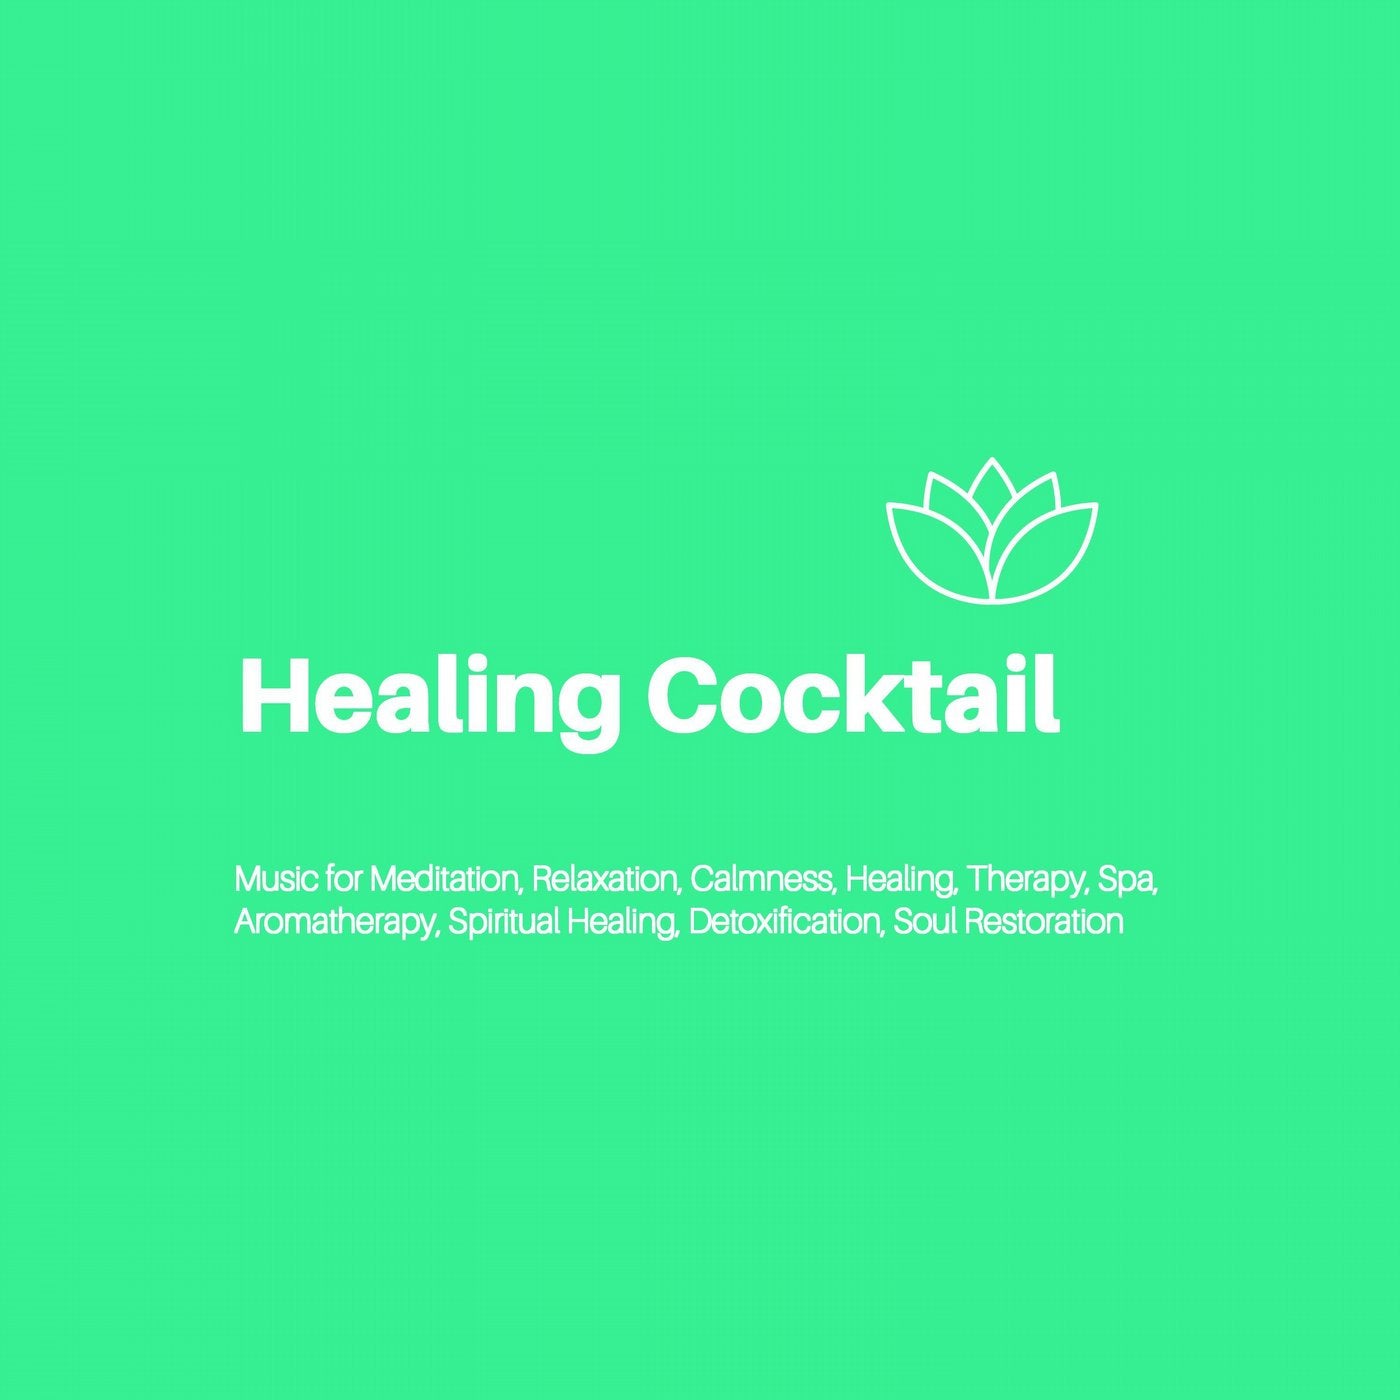 Healing Cocktail (Music For Meditation, Relaxation, Calmness, Healing, Therapy, Spa, Aromatherapy, Spiritual Healing, Detoxification, Soul Restoration)